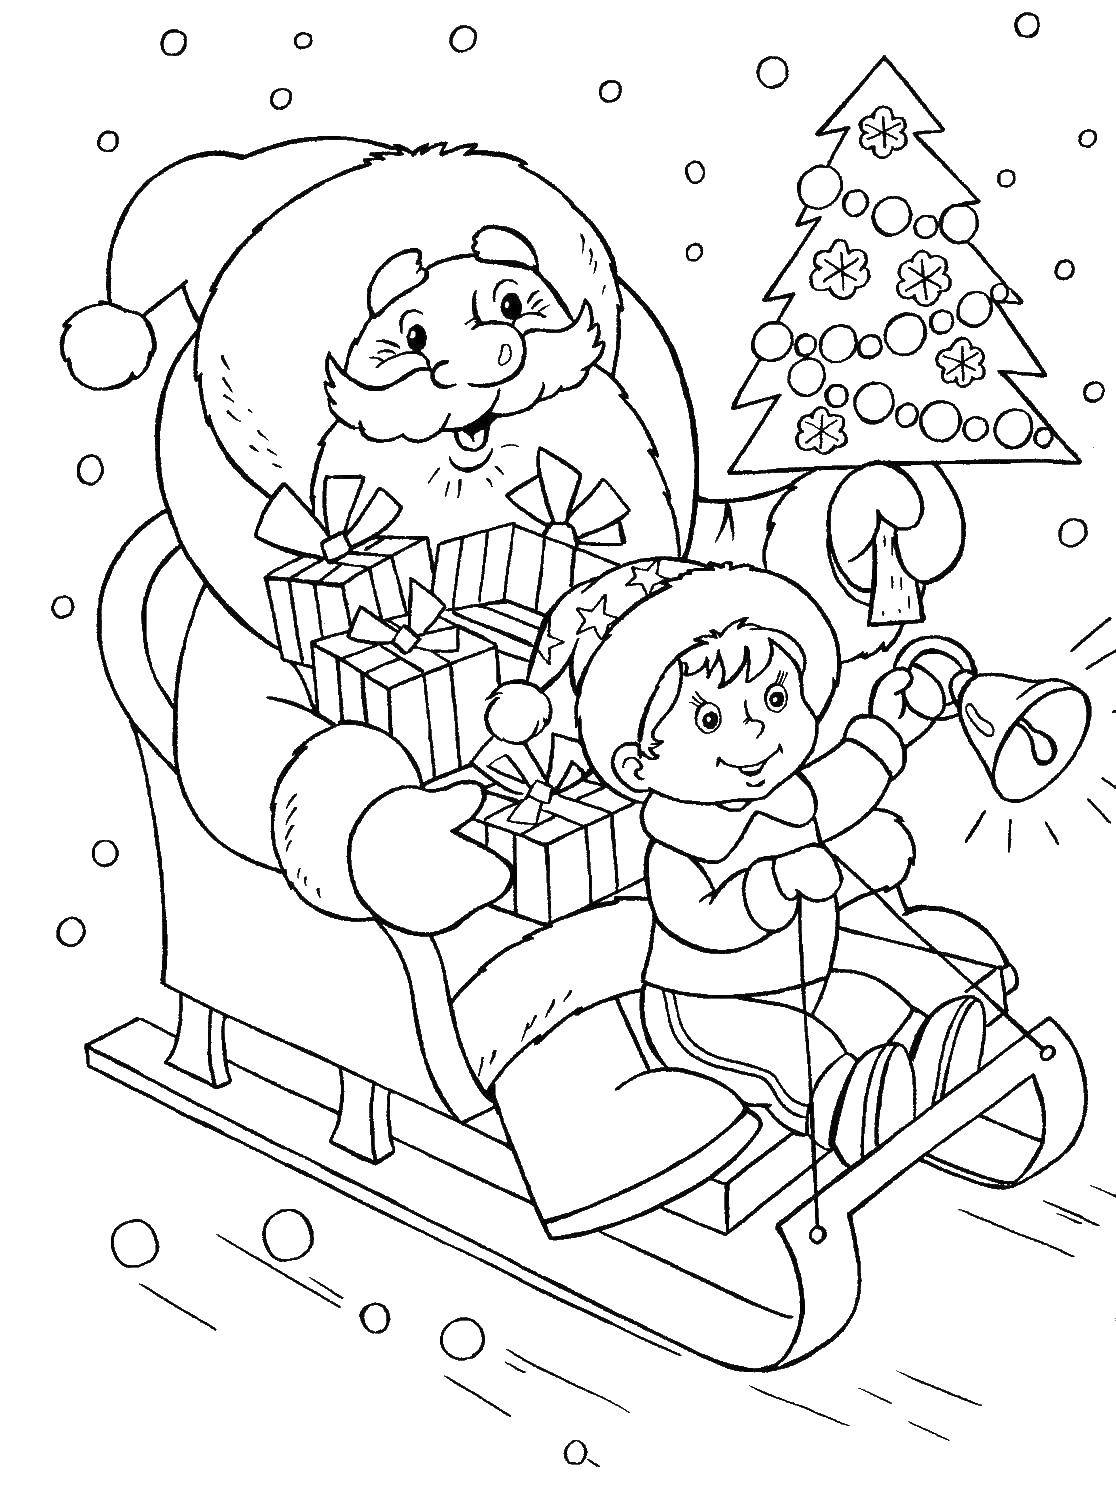 Coloring Santa Claus carrying gifts. Category Santa Claus. Tags:  New Year, Santa Claus, gifts.